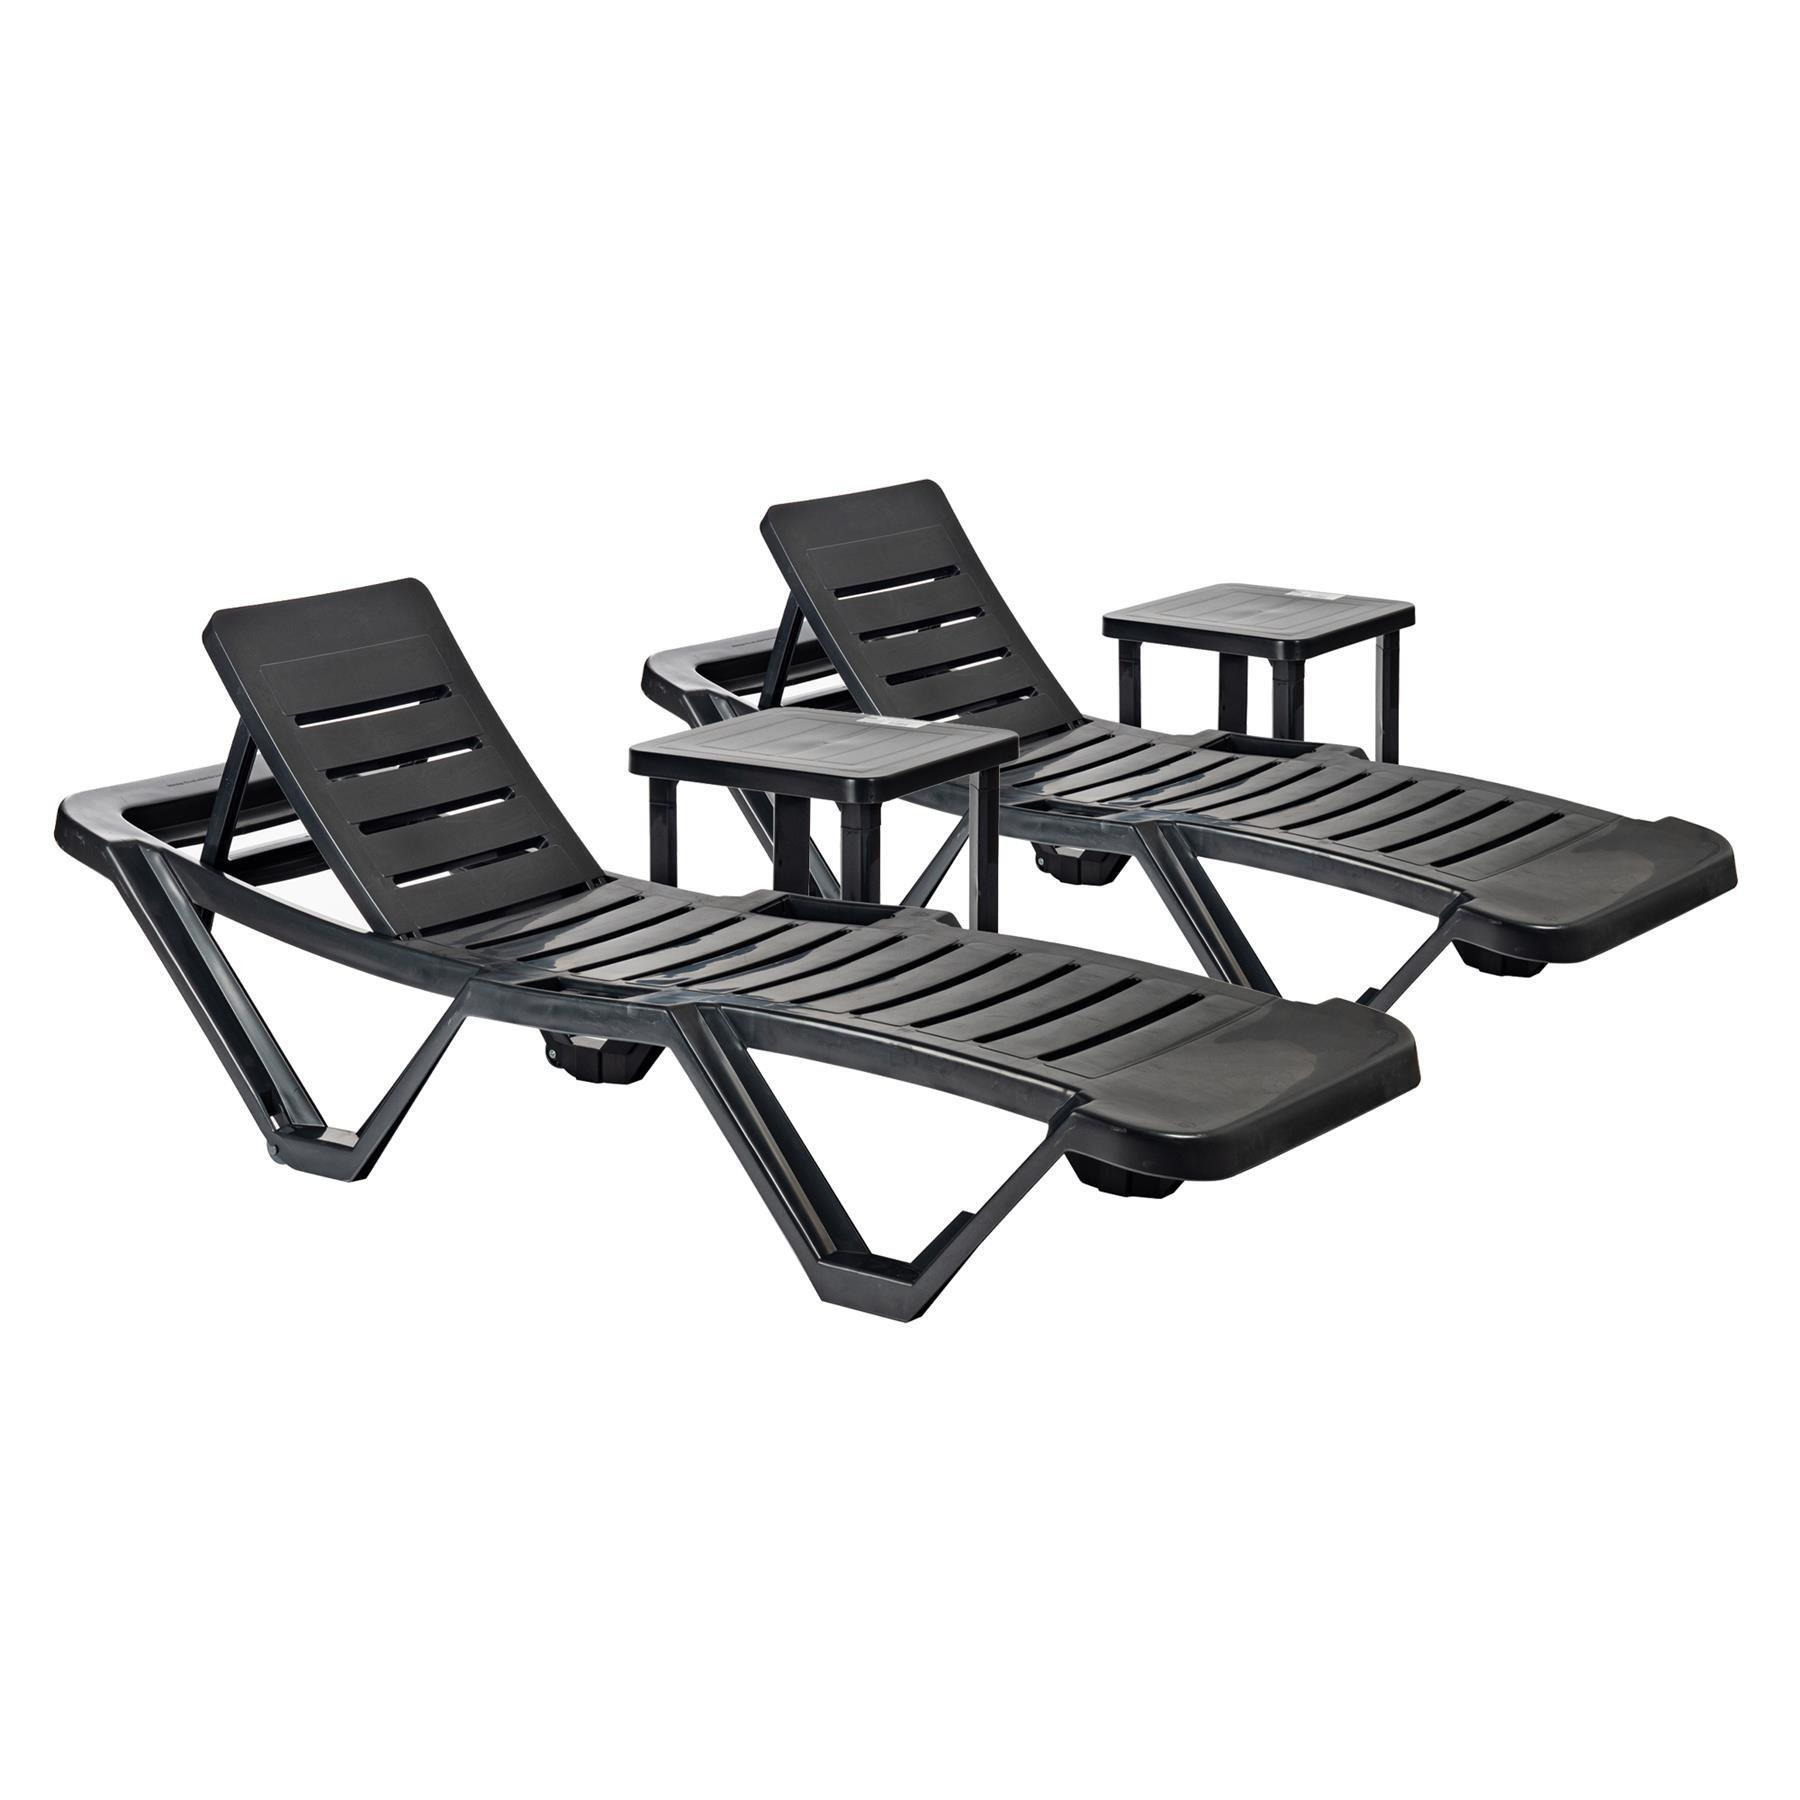 4 Piece Master Sun Loungers & Side Tables Set - image 1